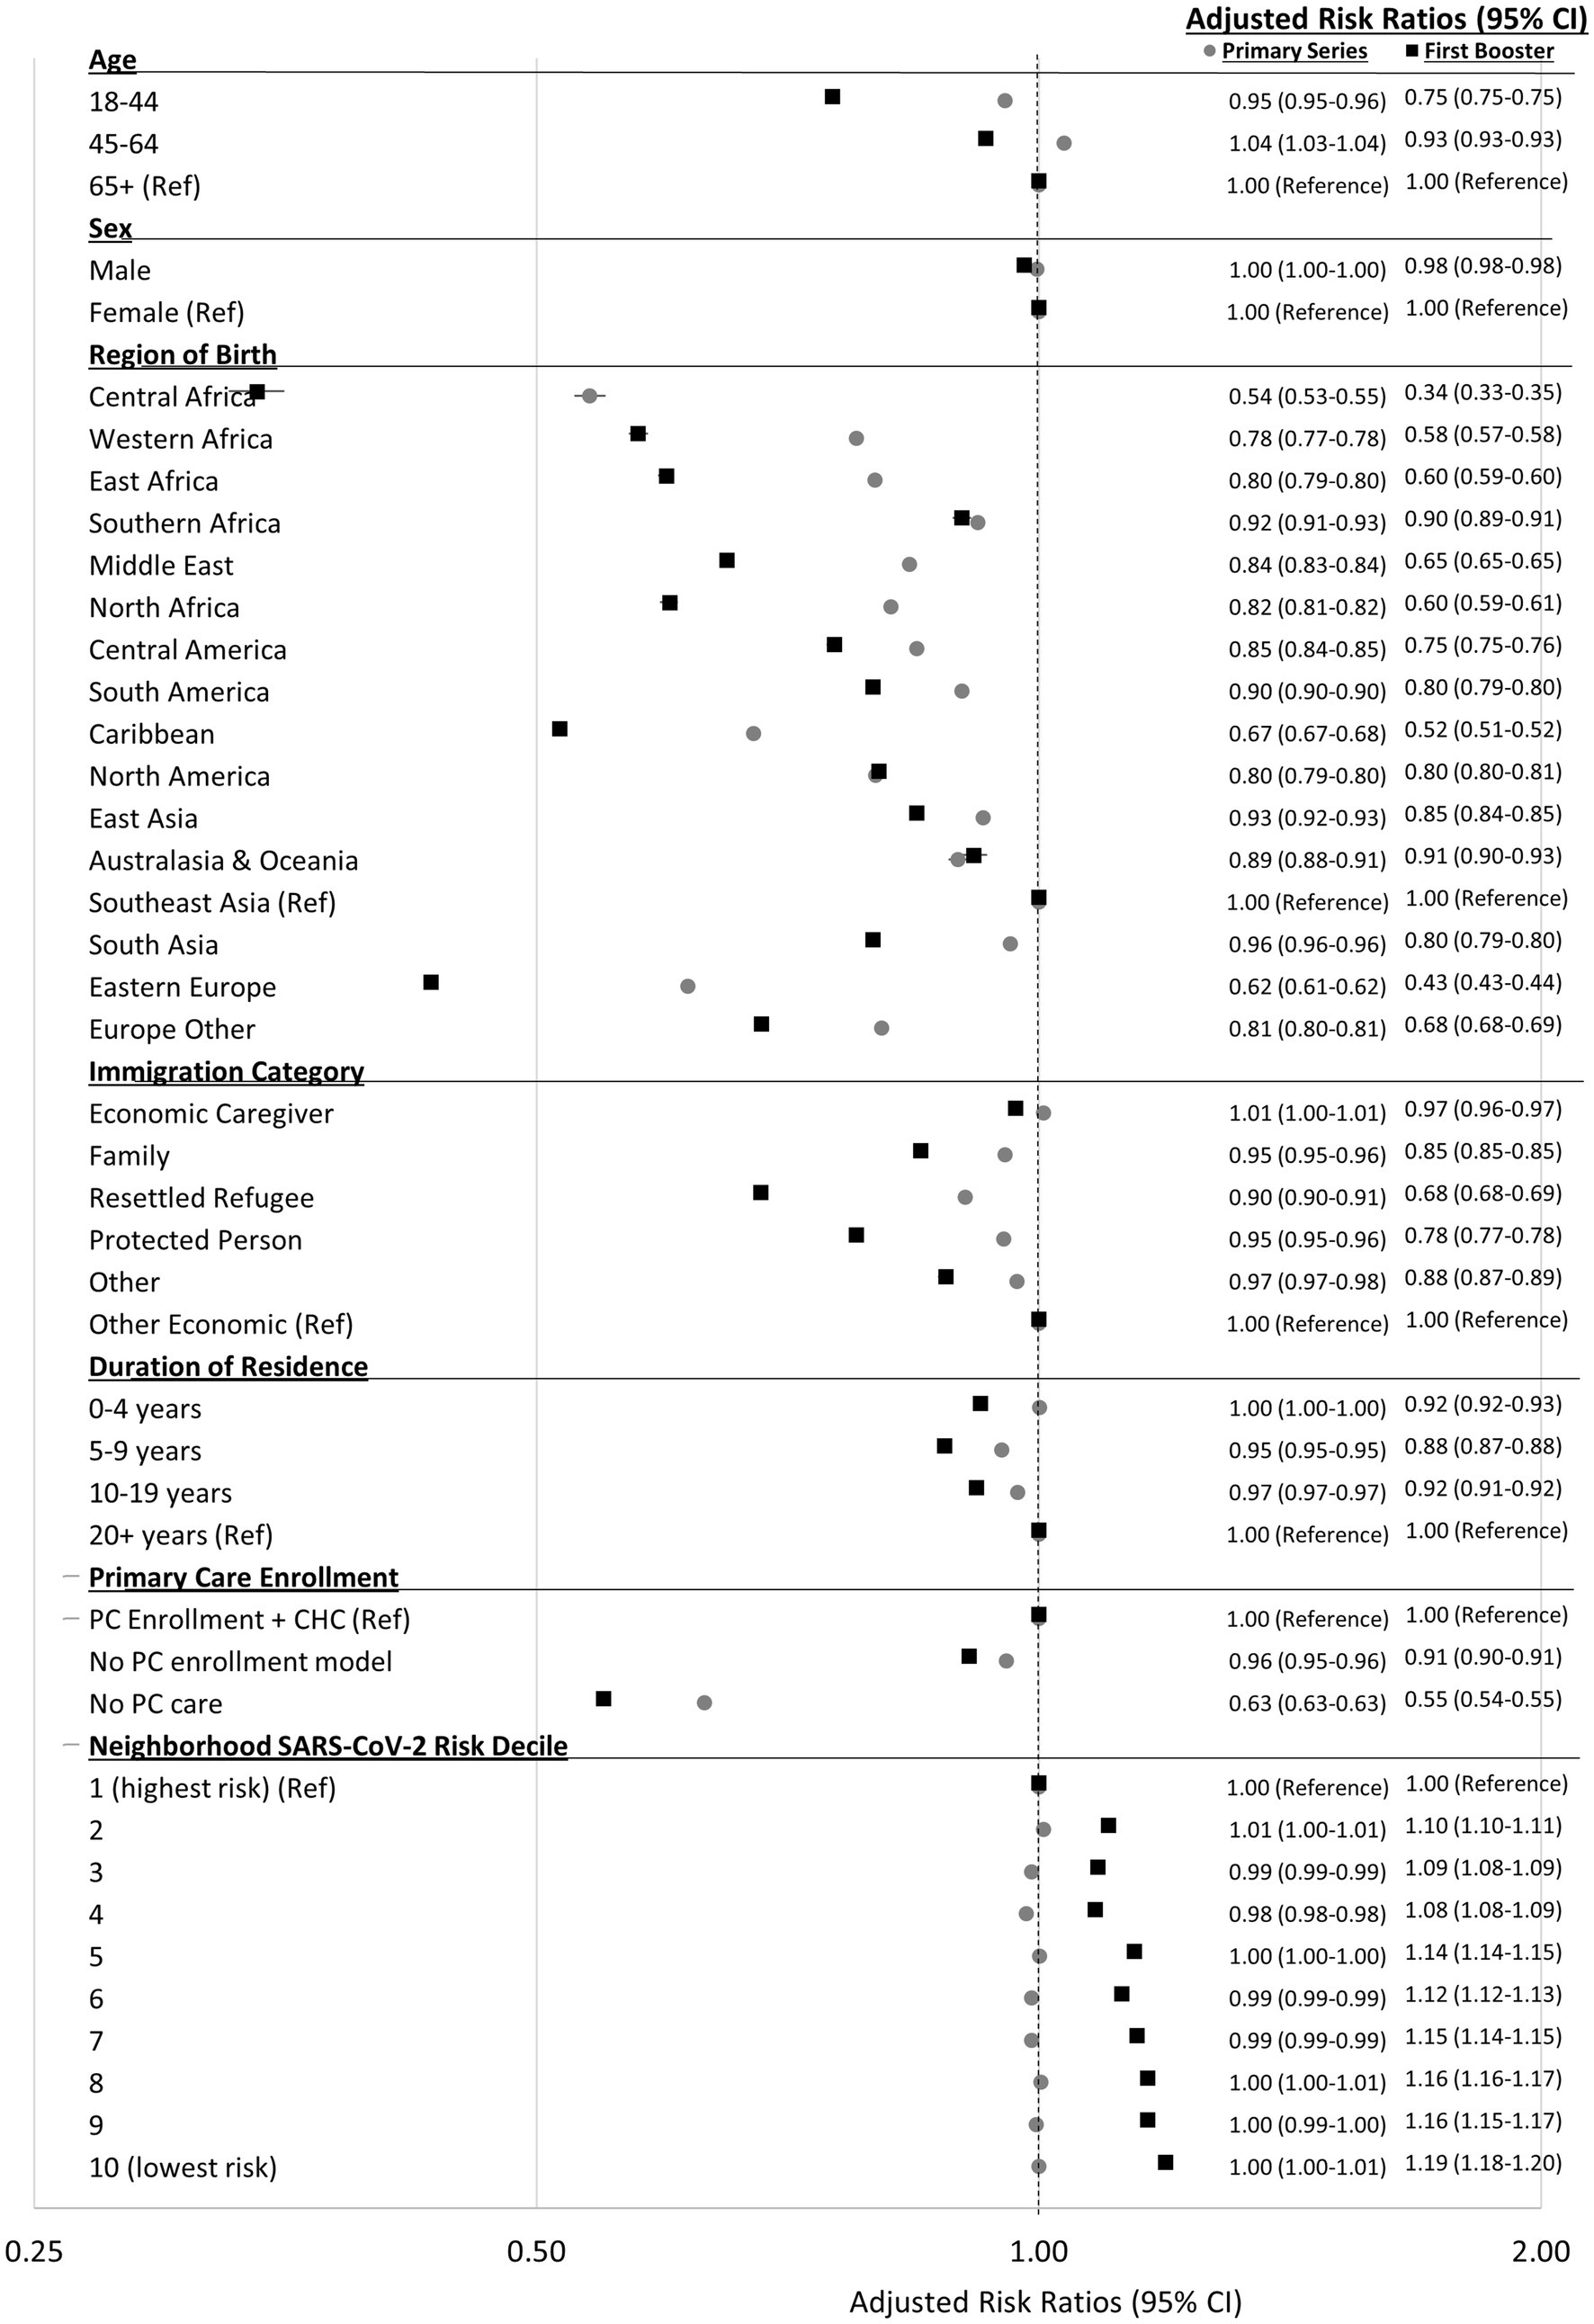 Frontiers  COVID-19 vaccine equity: a retrospective population-based  cohort study examining primary series and first booster coverage among  persons with a history of immigration and other residents of Ontario, Canada